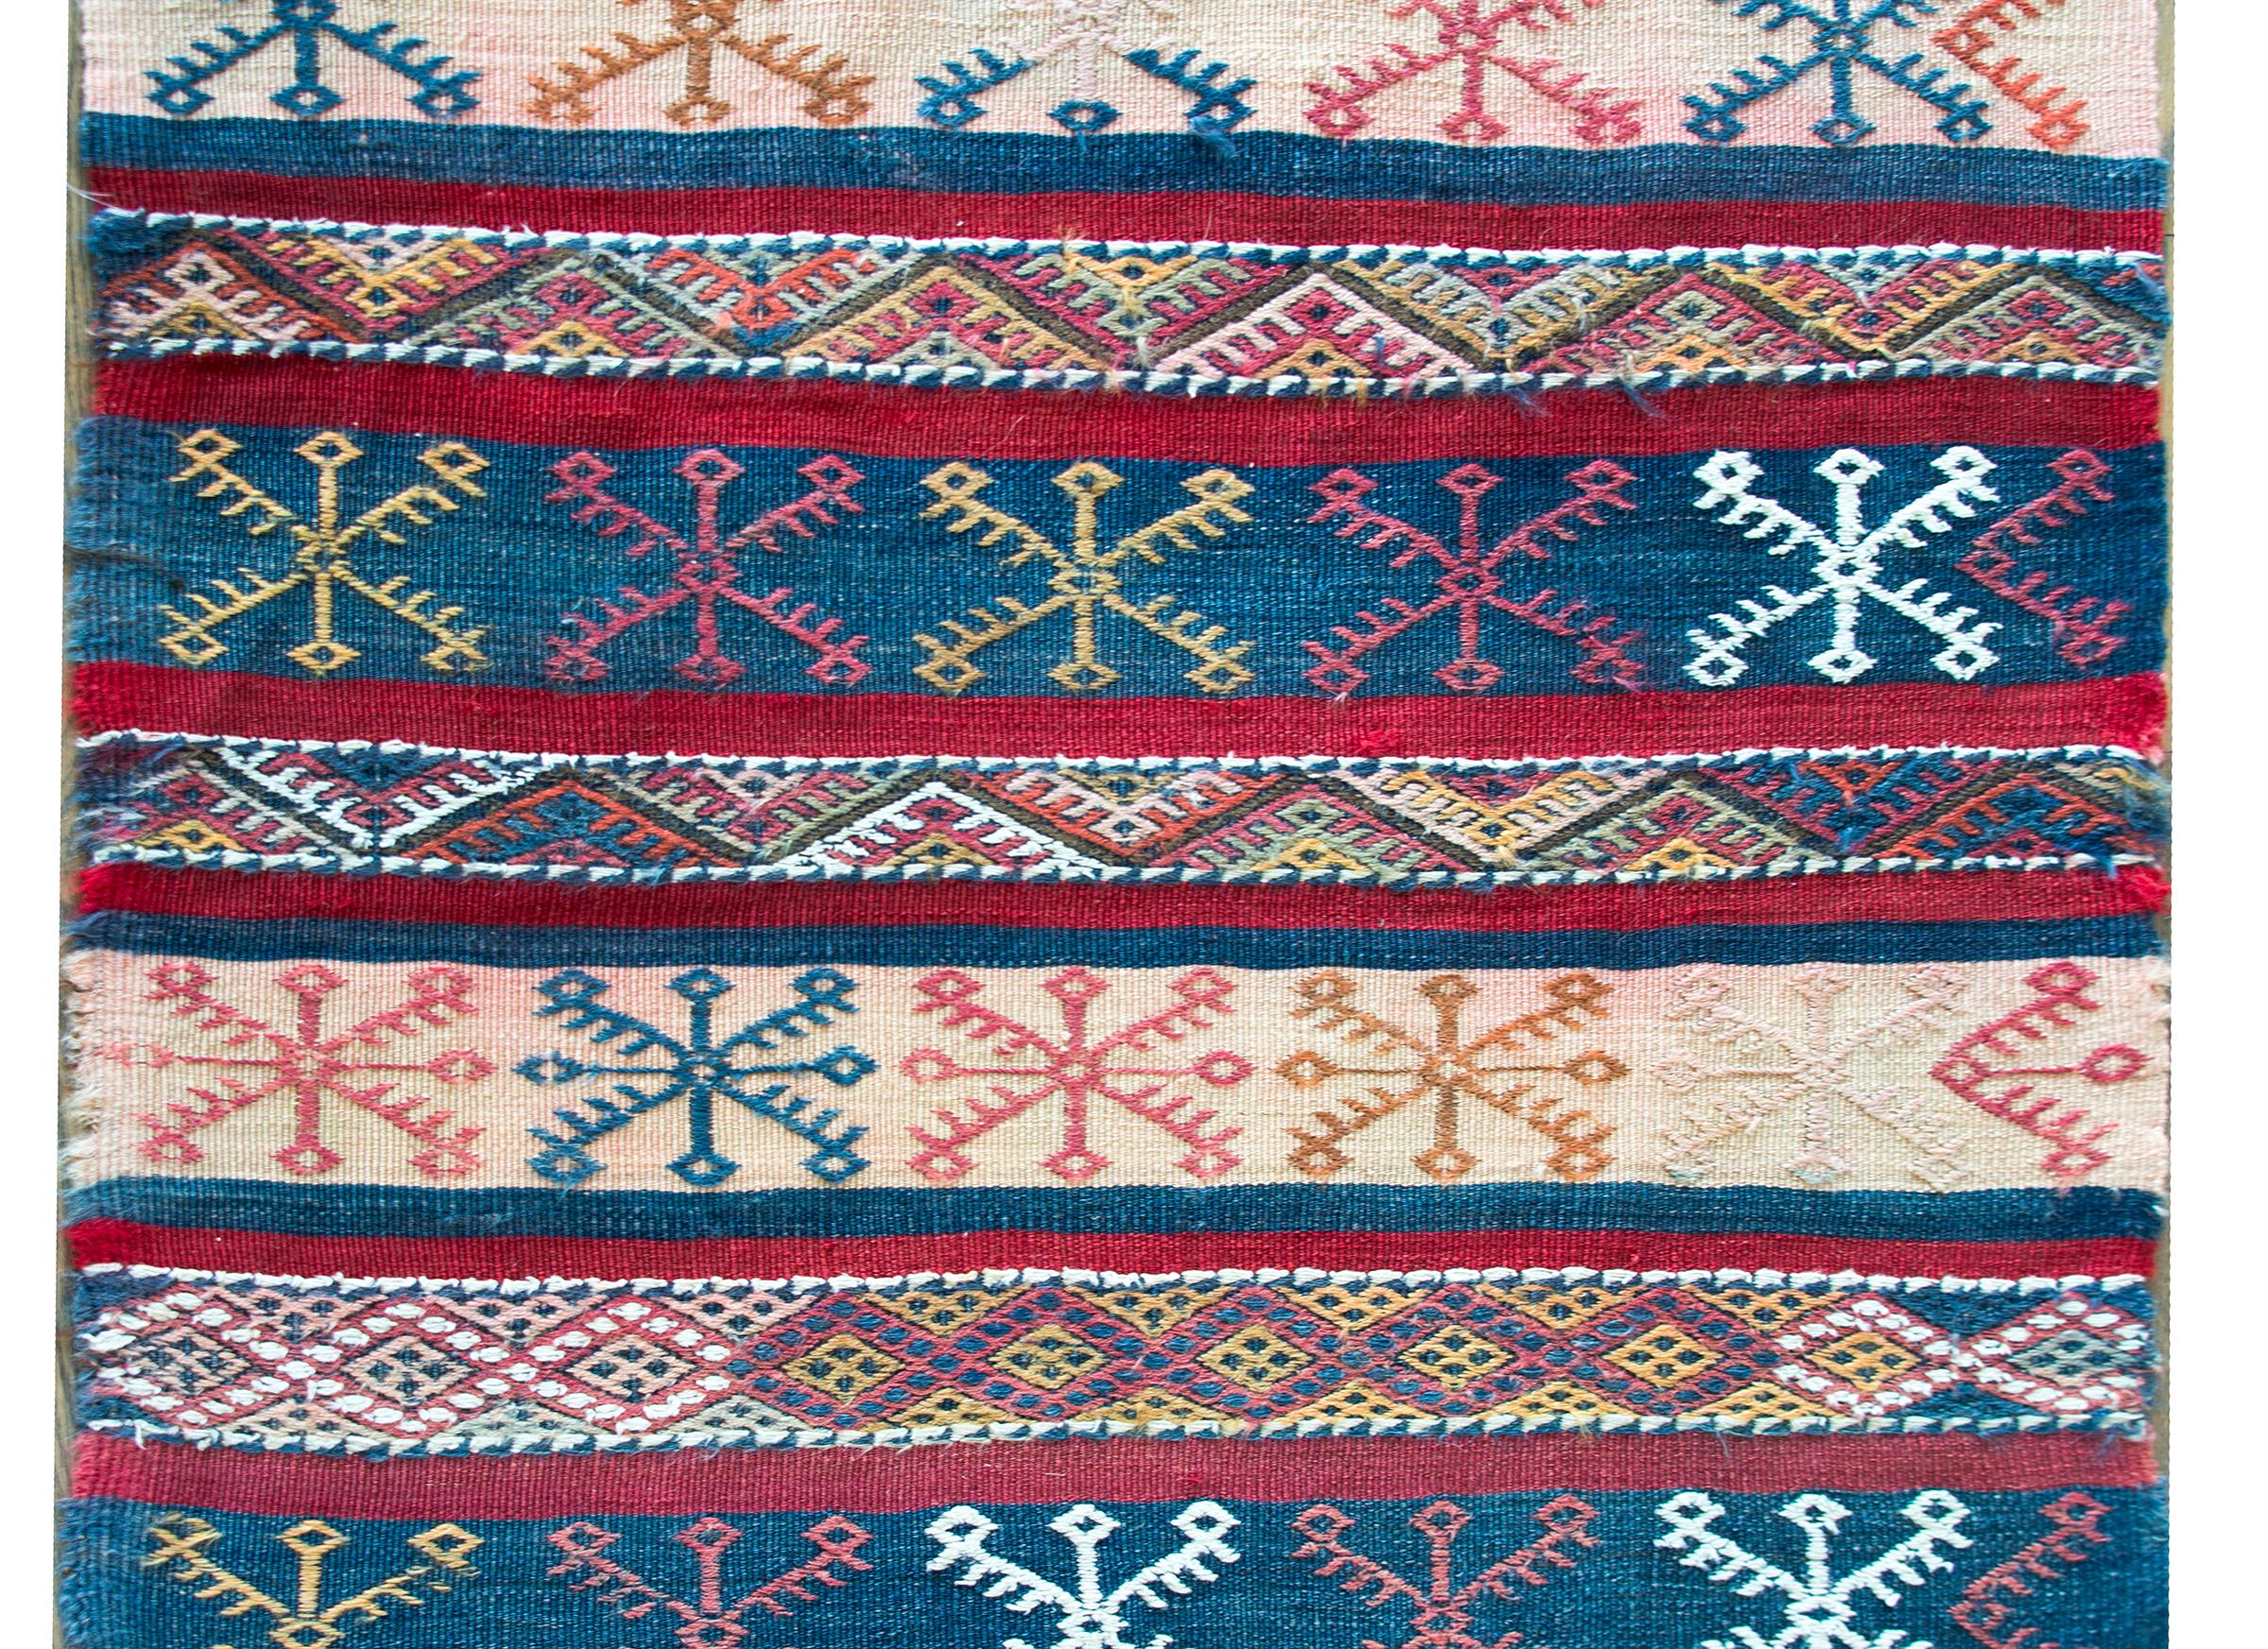 A chic vintage Moroccan kilim rug with a wonderful indigo, crimson, and cream striped pattern with embroidered stylized flowers across the entire rug.